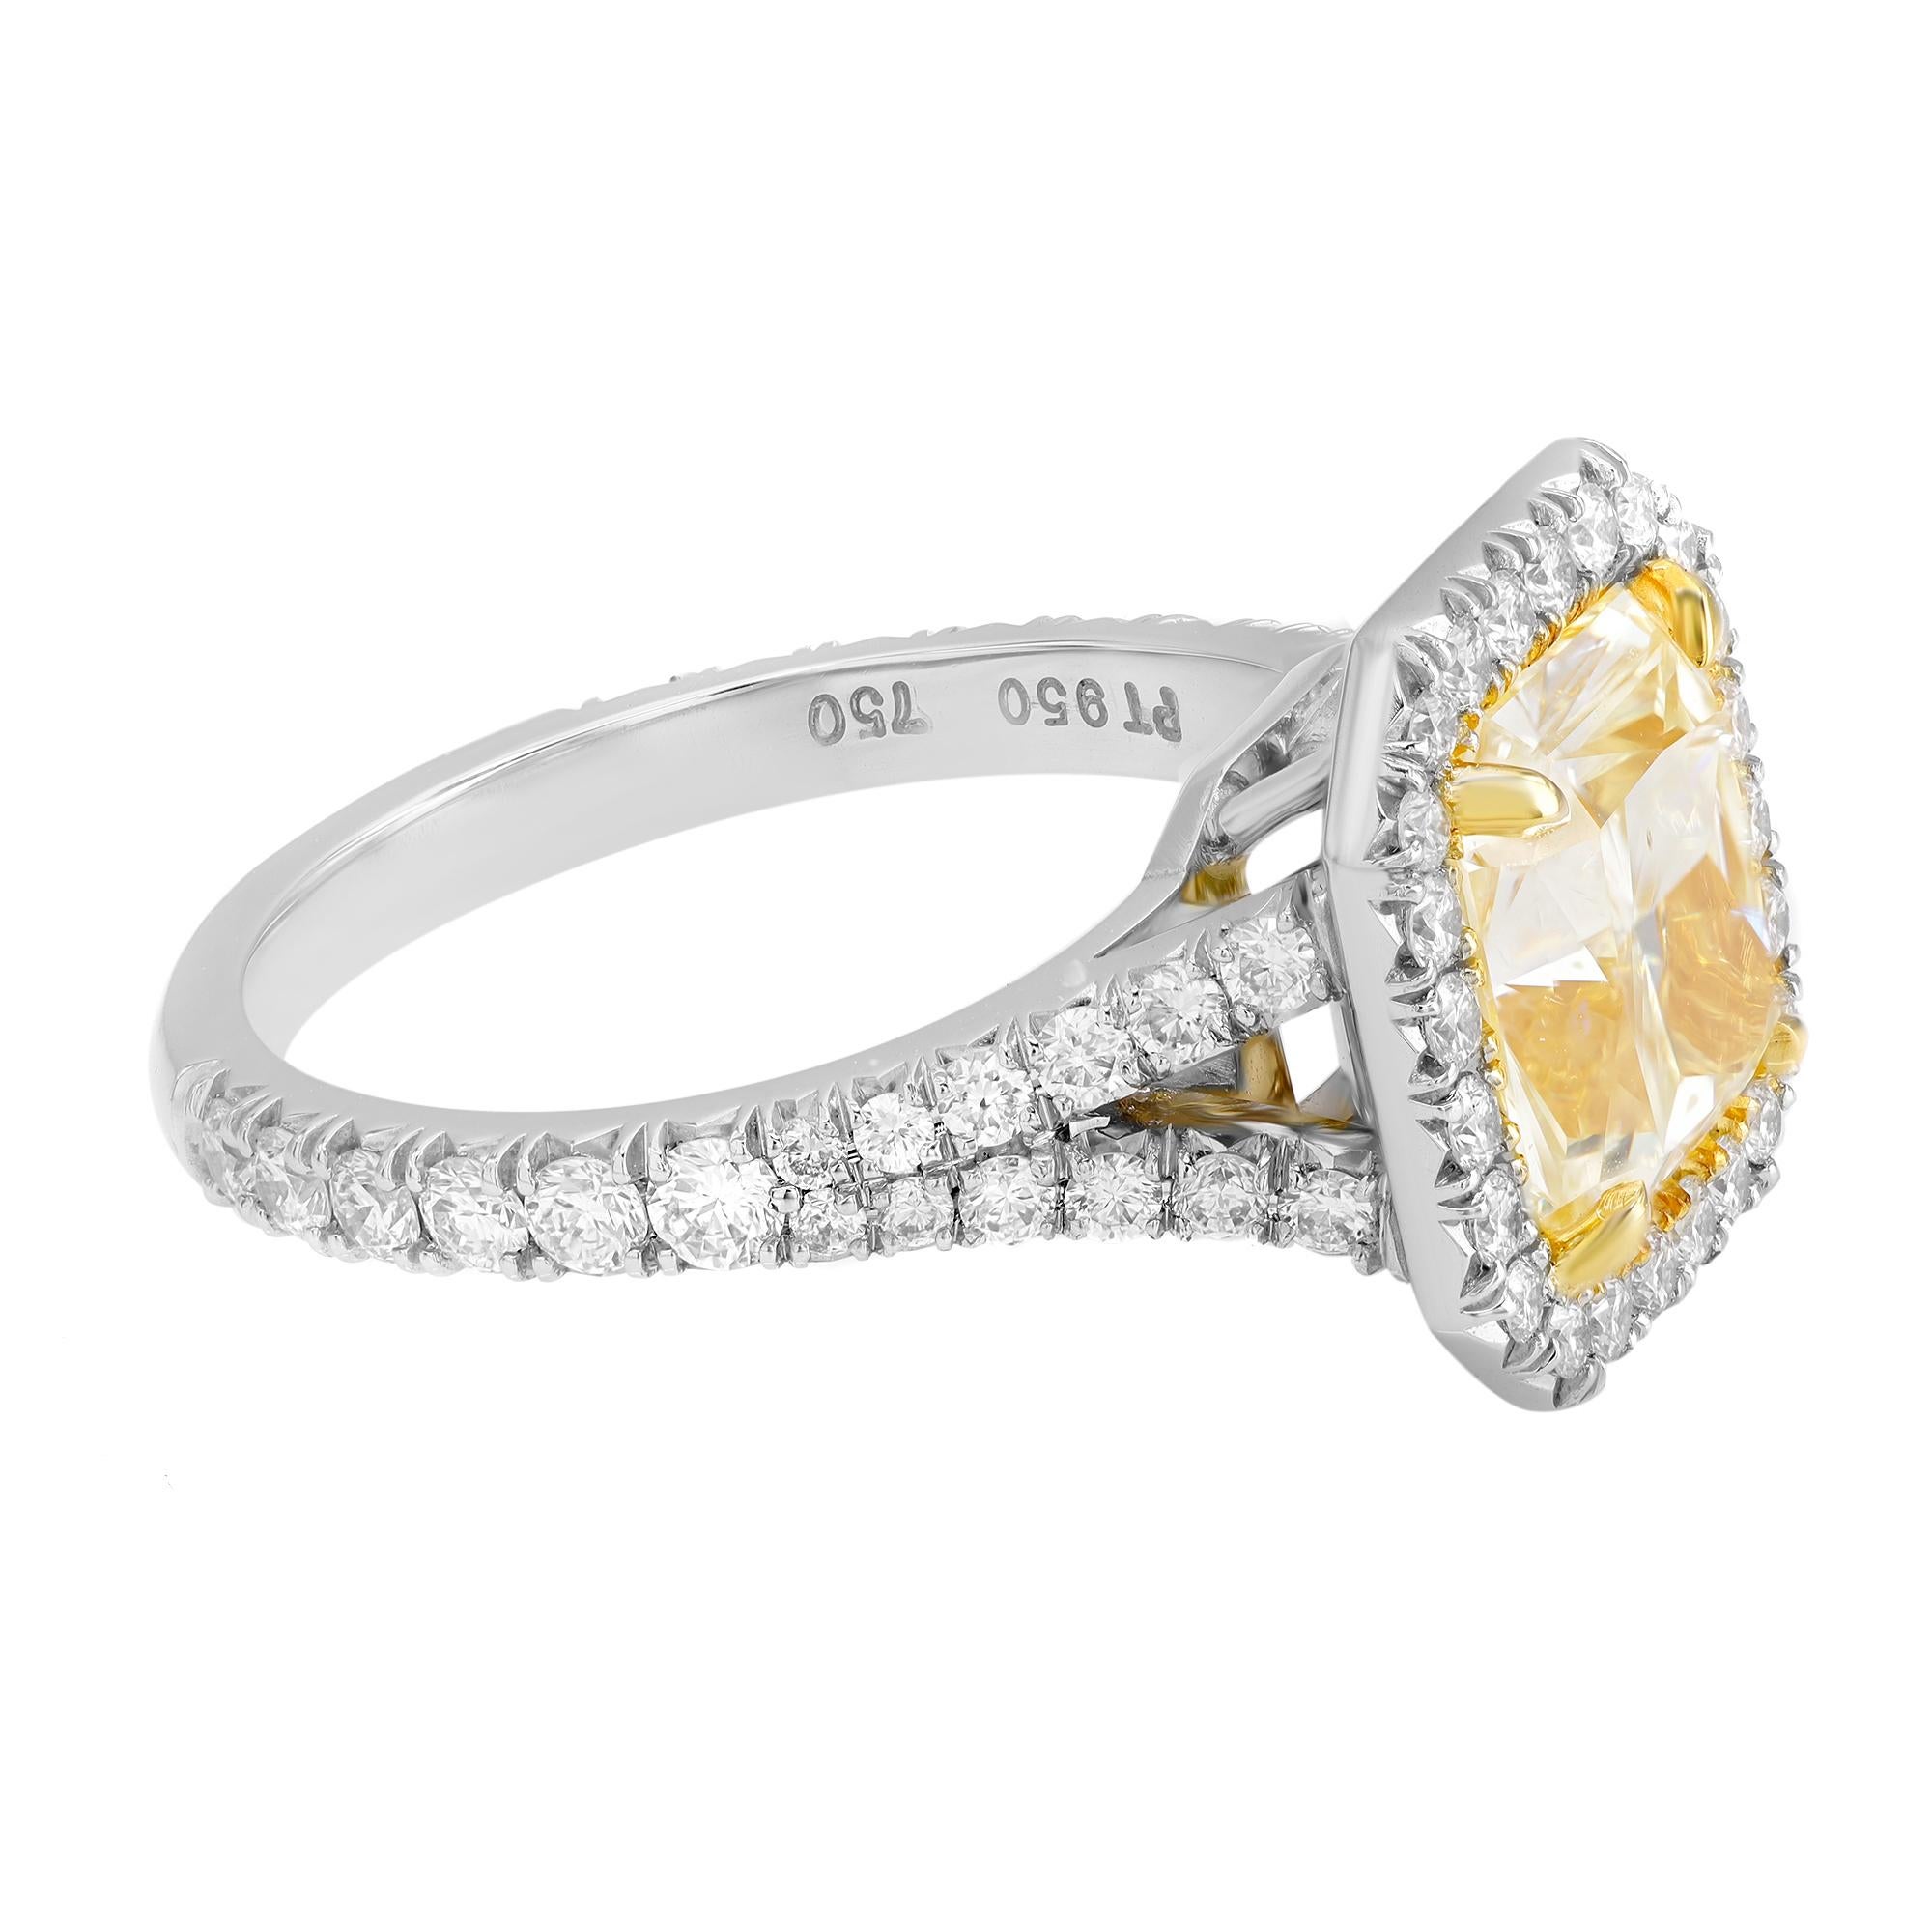 This breathtaking engagement ring features a prong set natural cut cornered rectangular brilliant cut diamond weighing 3.03 carats surrounded by a halo of sparkling round white diamonds set all through the band. Handcrafted to perfection. Center